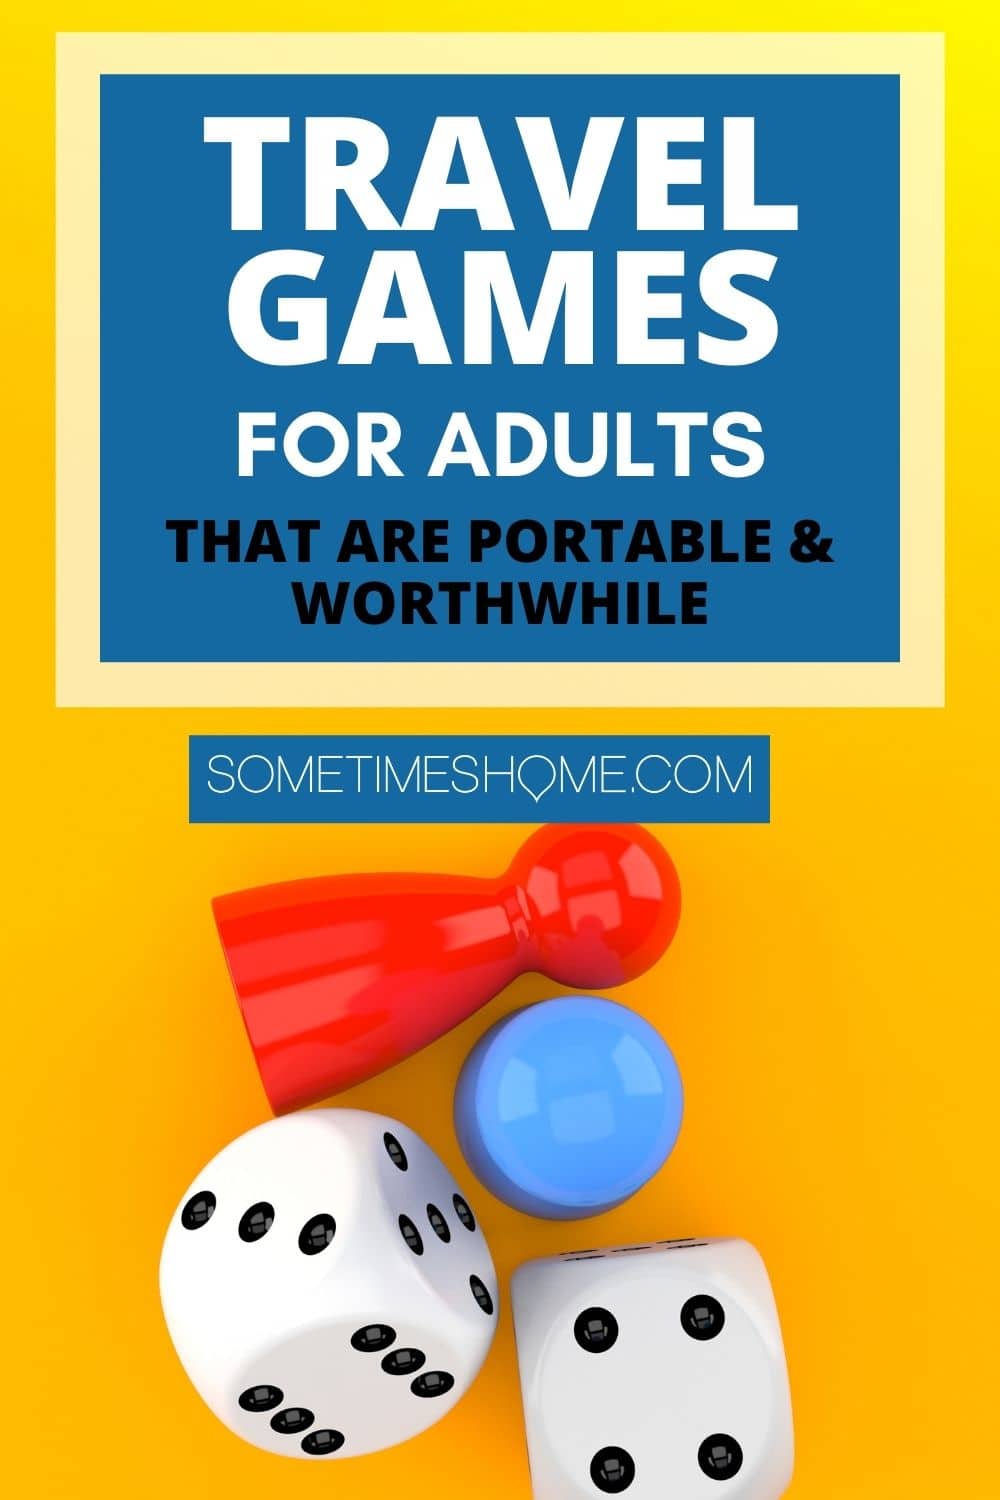 Travel Games for Adults that are portable and worthwhile, with a picture of game pieces.